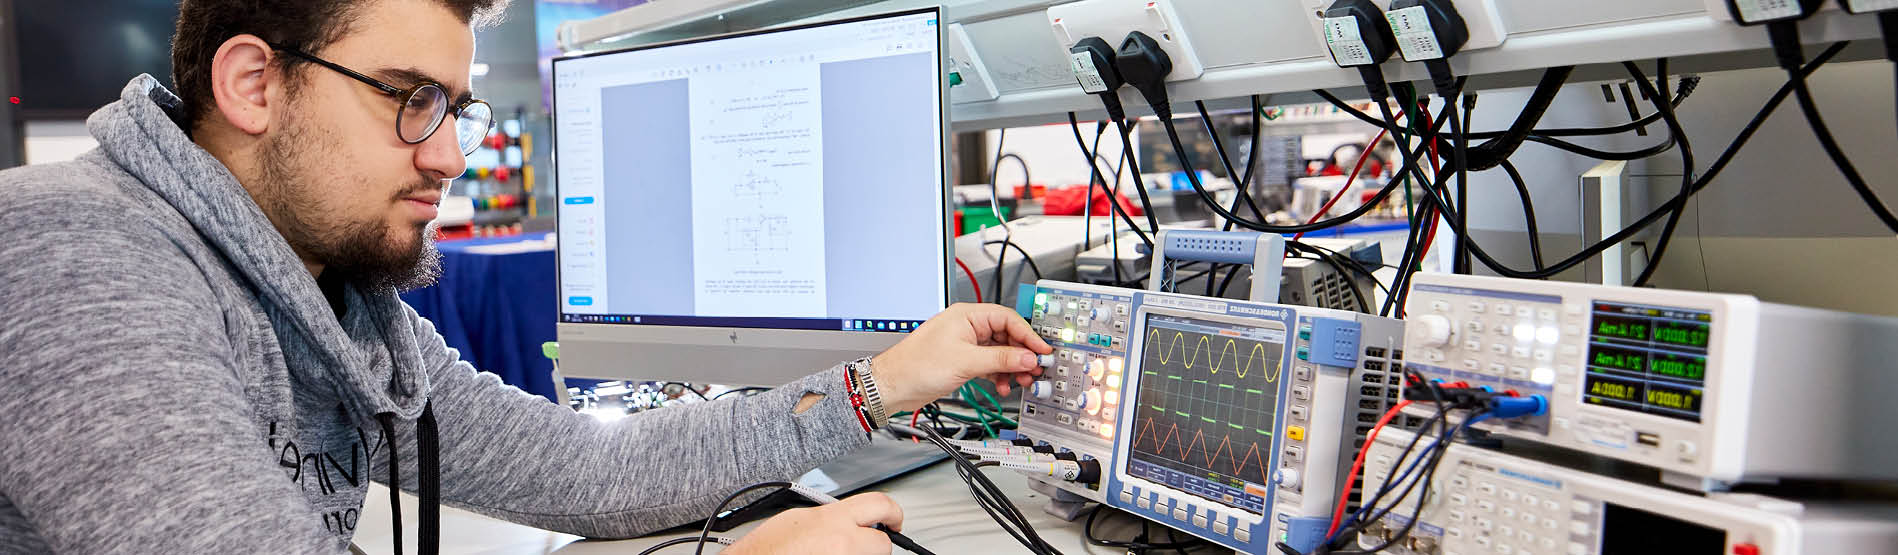 Student working in the electronics lab